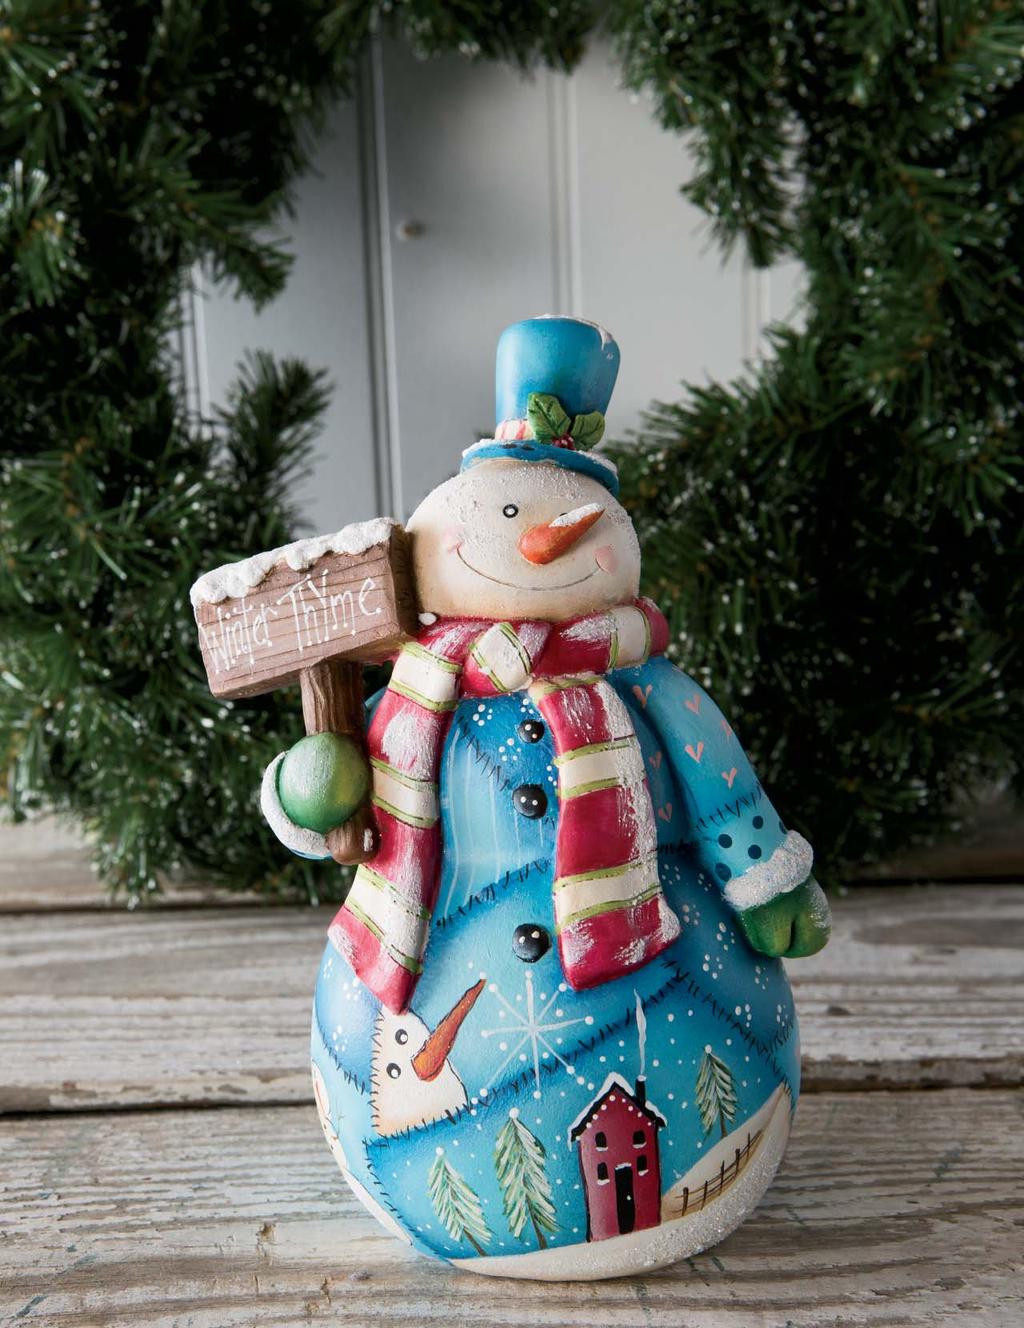 CALICO SNOWMAN by